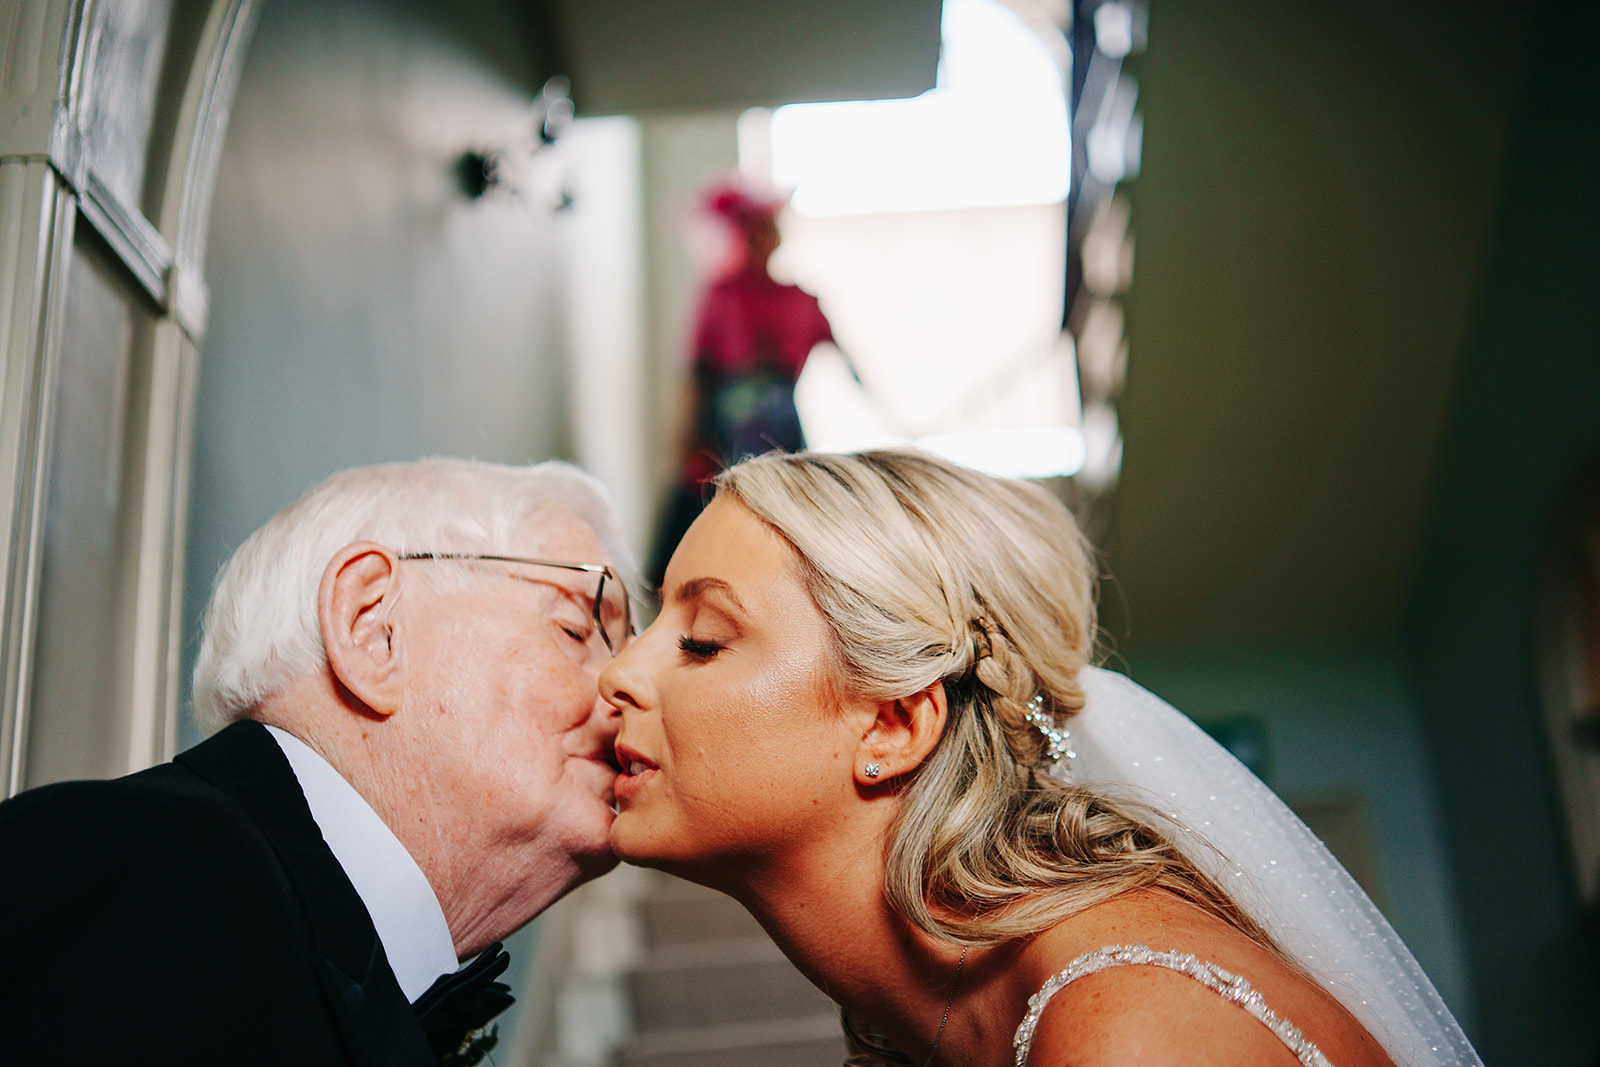 Real moment on wedding day, grandfather sees bride at hornington manor 